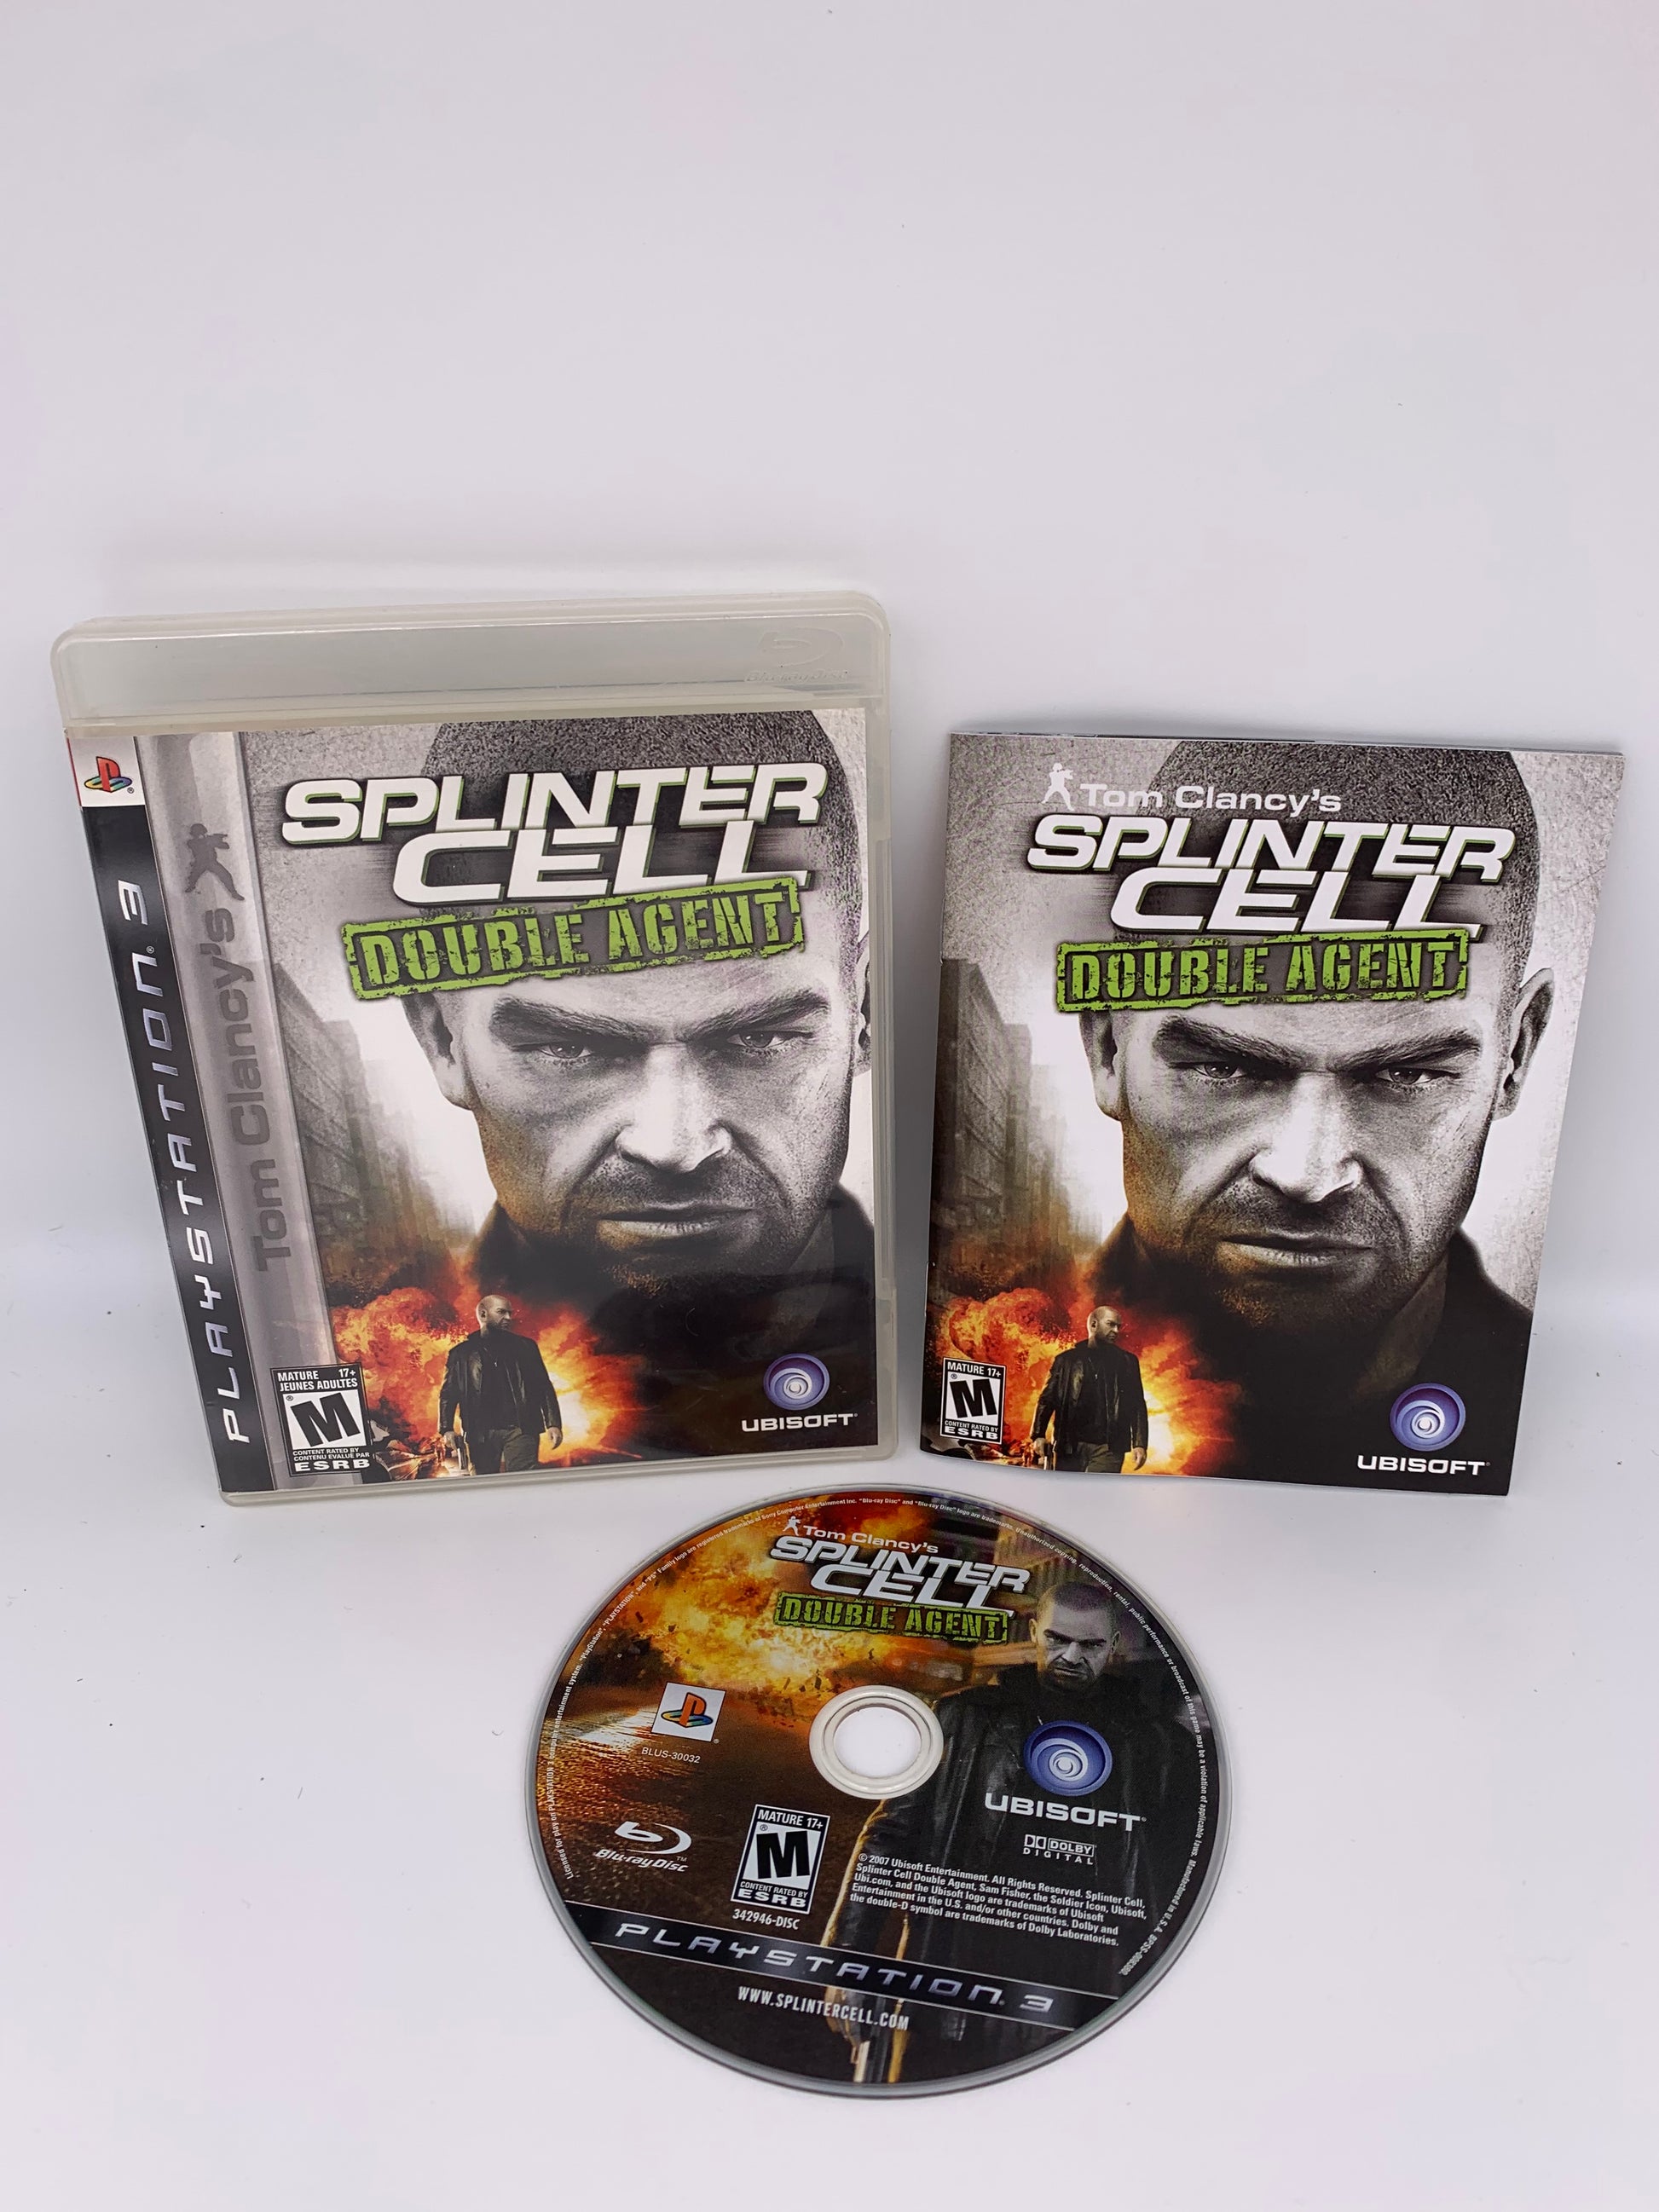 PiXEL-RETRO.COM : SONY PLAYSTATION 3 (PS3) COMPLET CIB BOX MANUAL GAME NTSC TOM CLANCY'S SPLINTER CELL DOUBLE AGENT